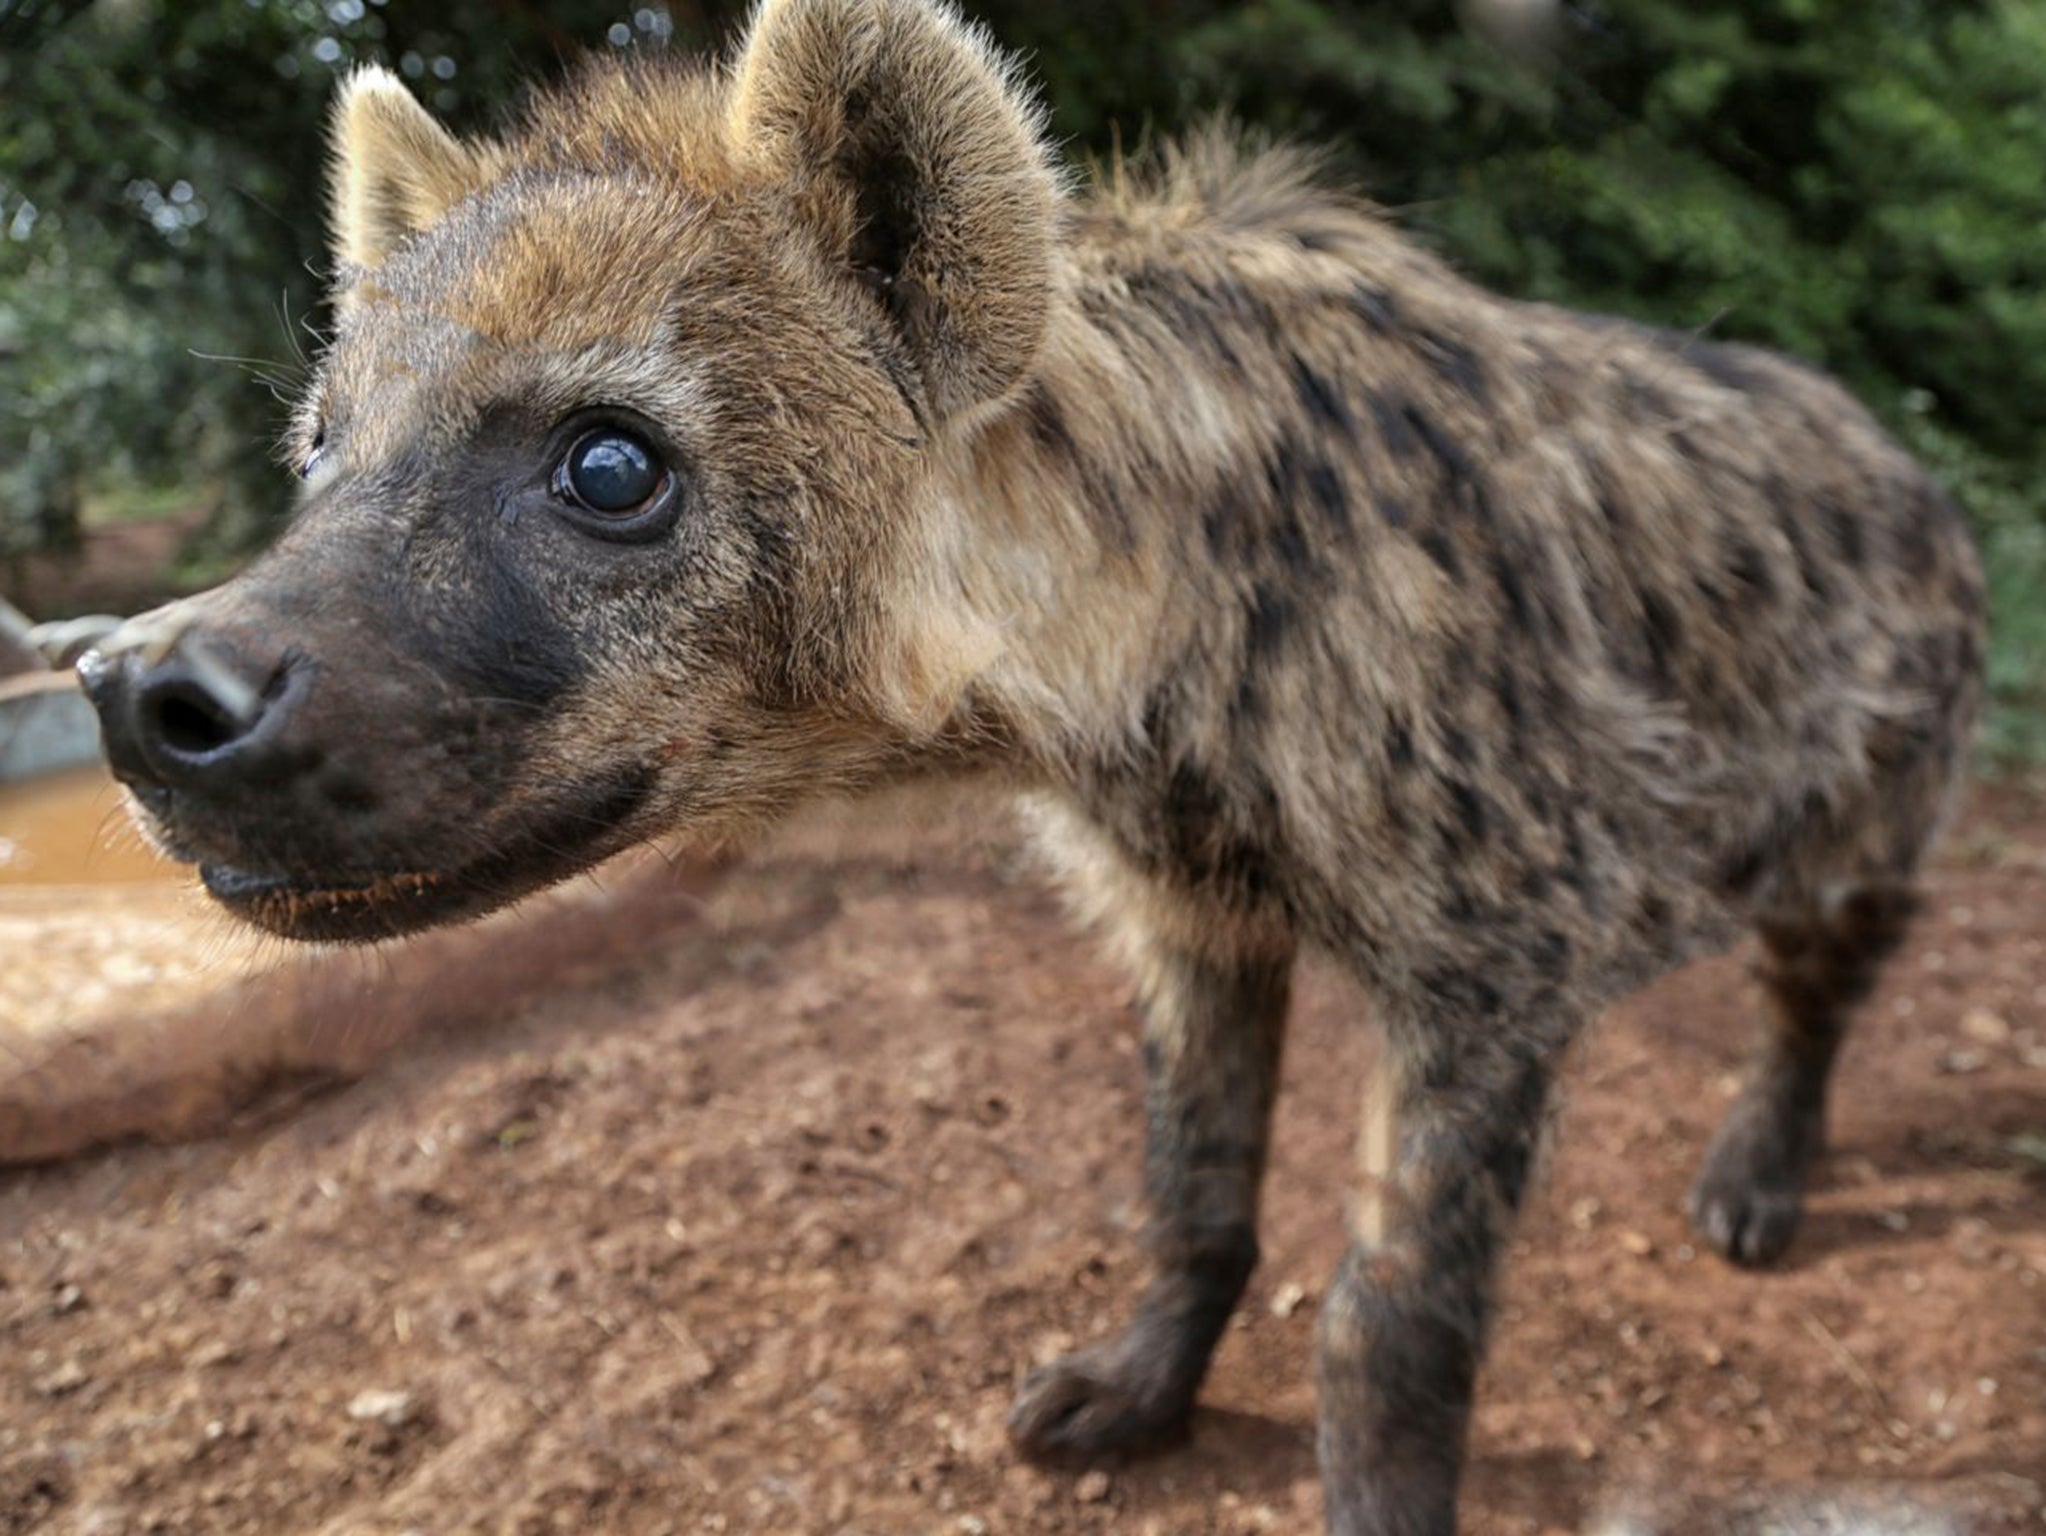 Hyenas have been maligned for millennia – from the days of antiquity when they were despised as grave robbers